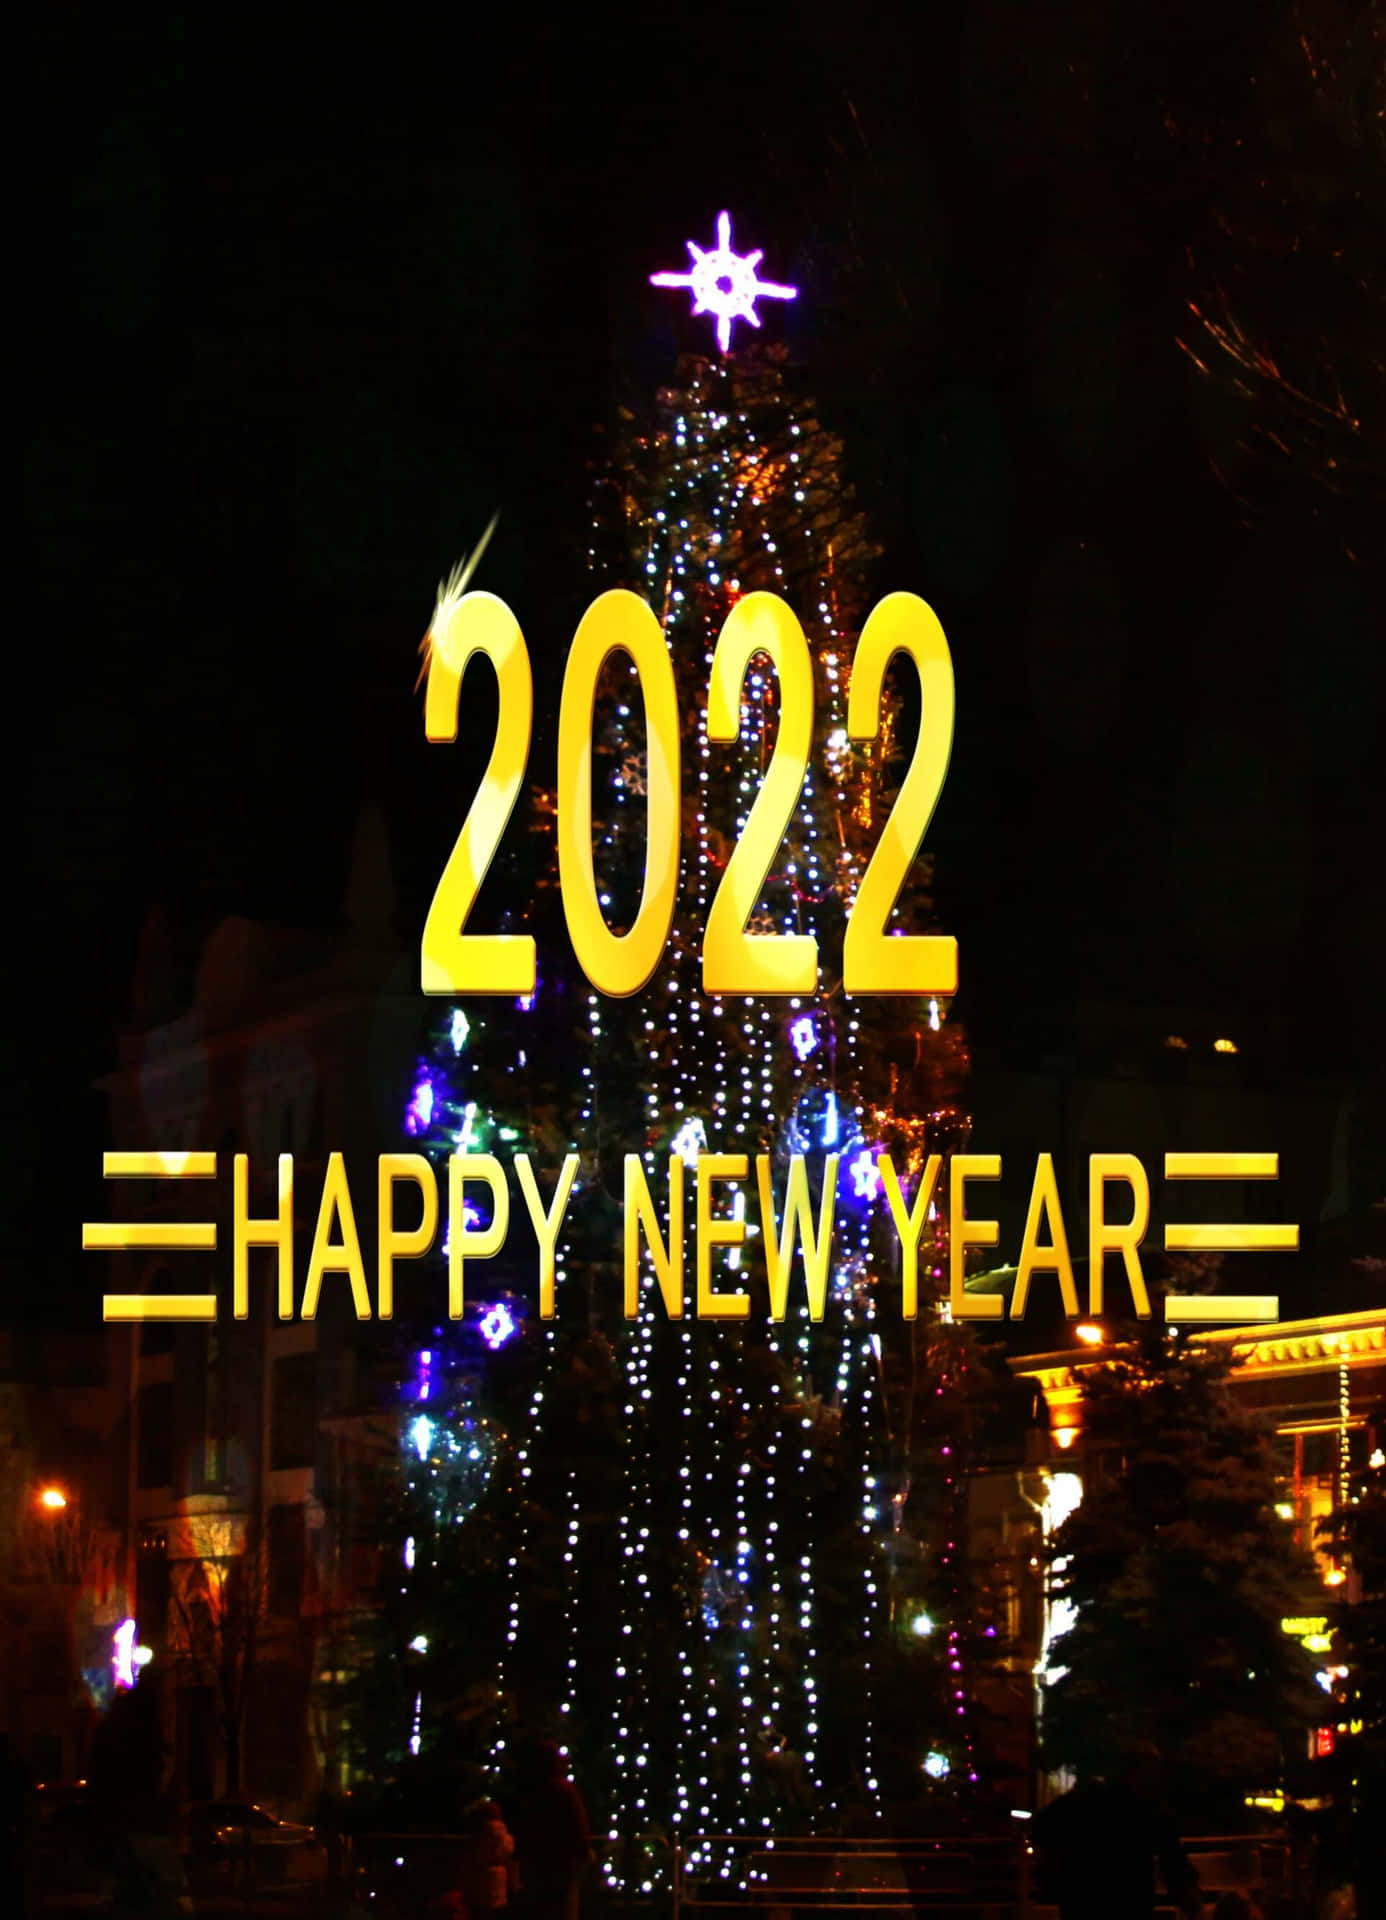 Celebrate the New Year 2022